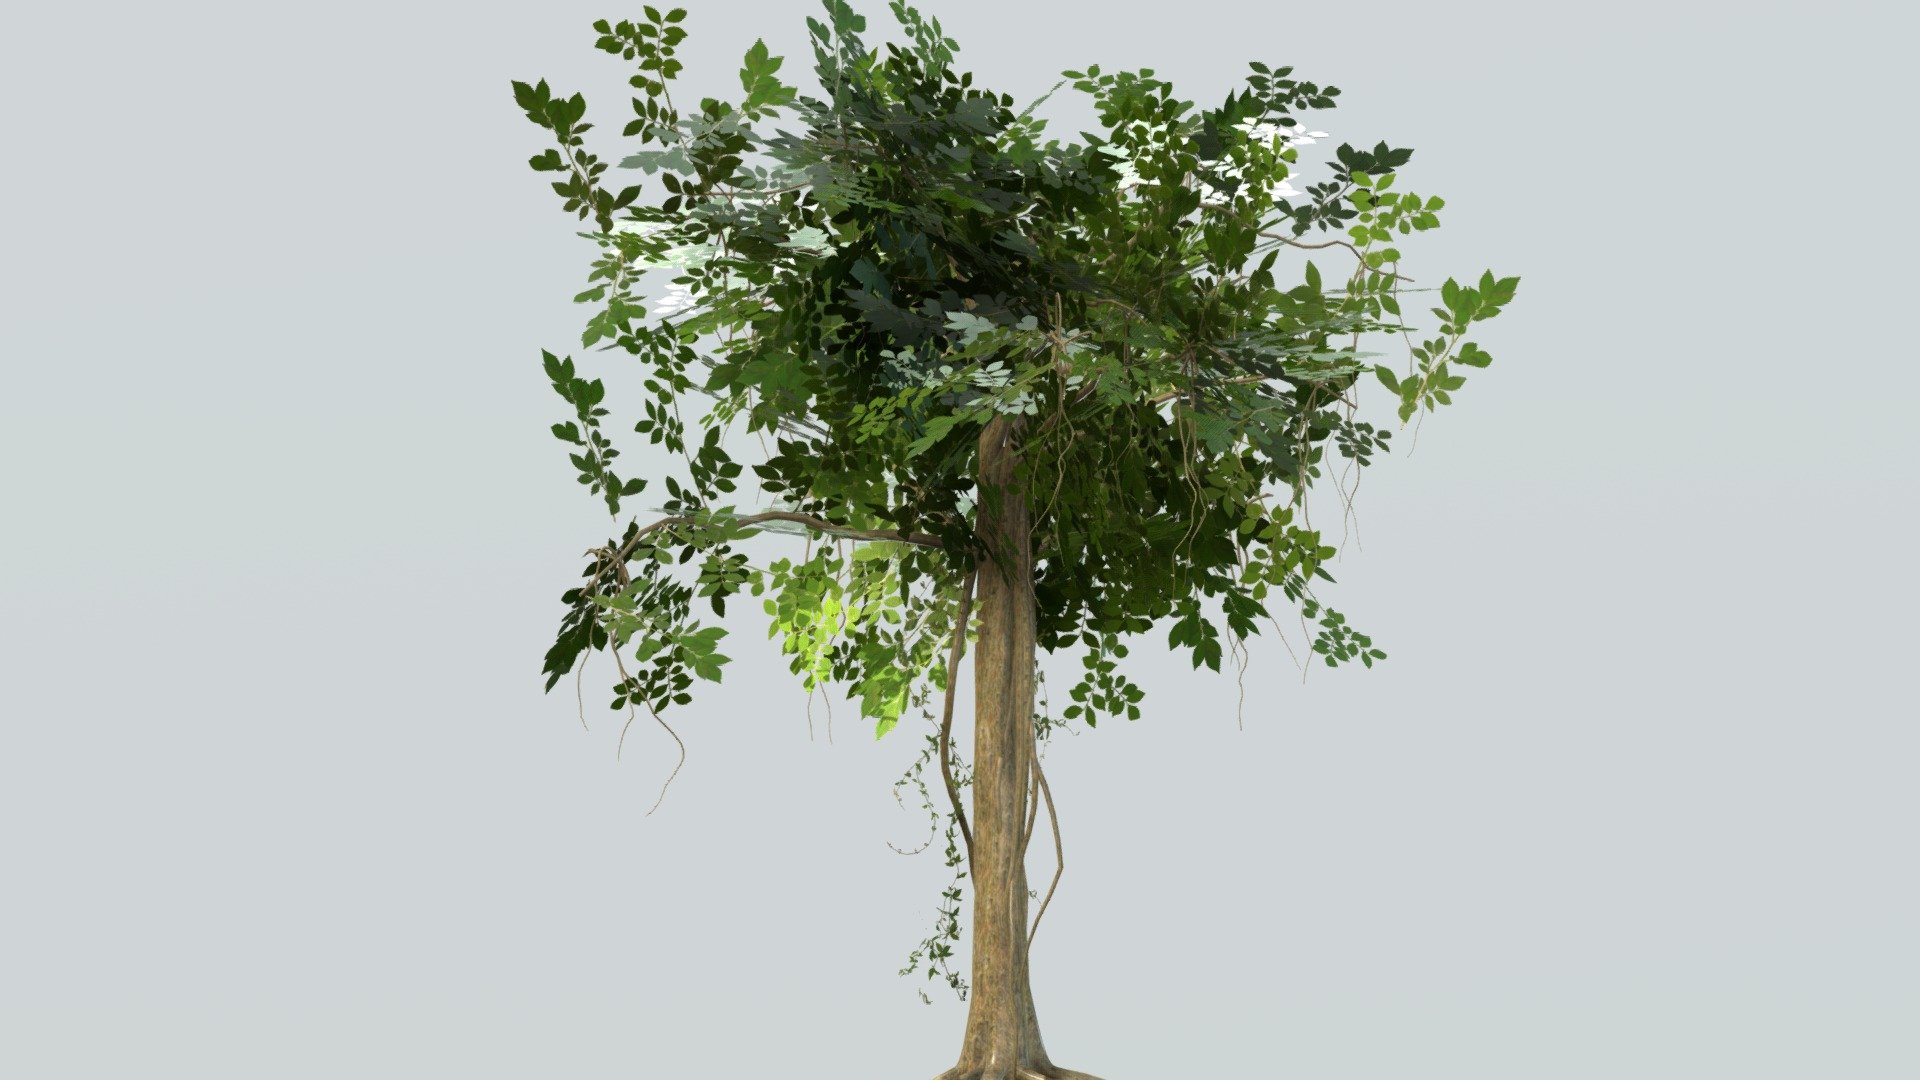 Textured free jungle tree, for all uses just credit me in a place where I can see it - jungle tree - Download Free 3D model by loganghost115 (@juancarlos474) 3d model